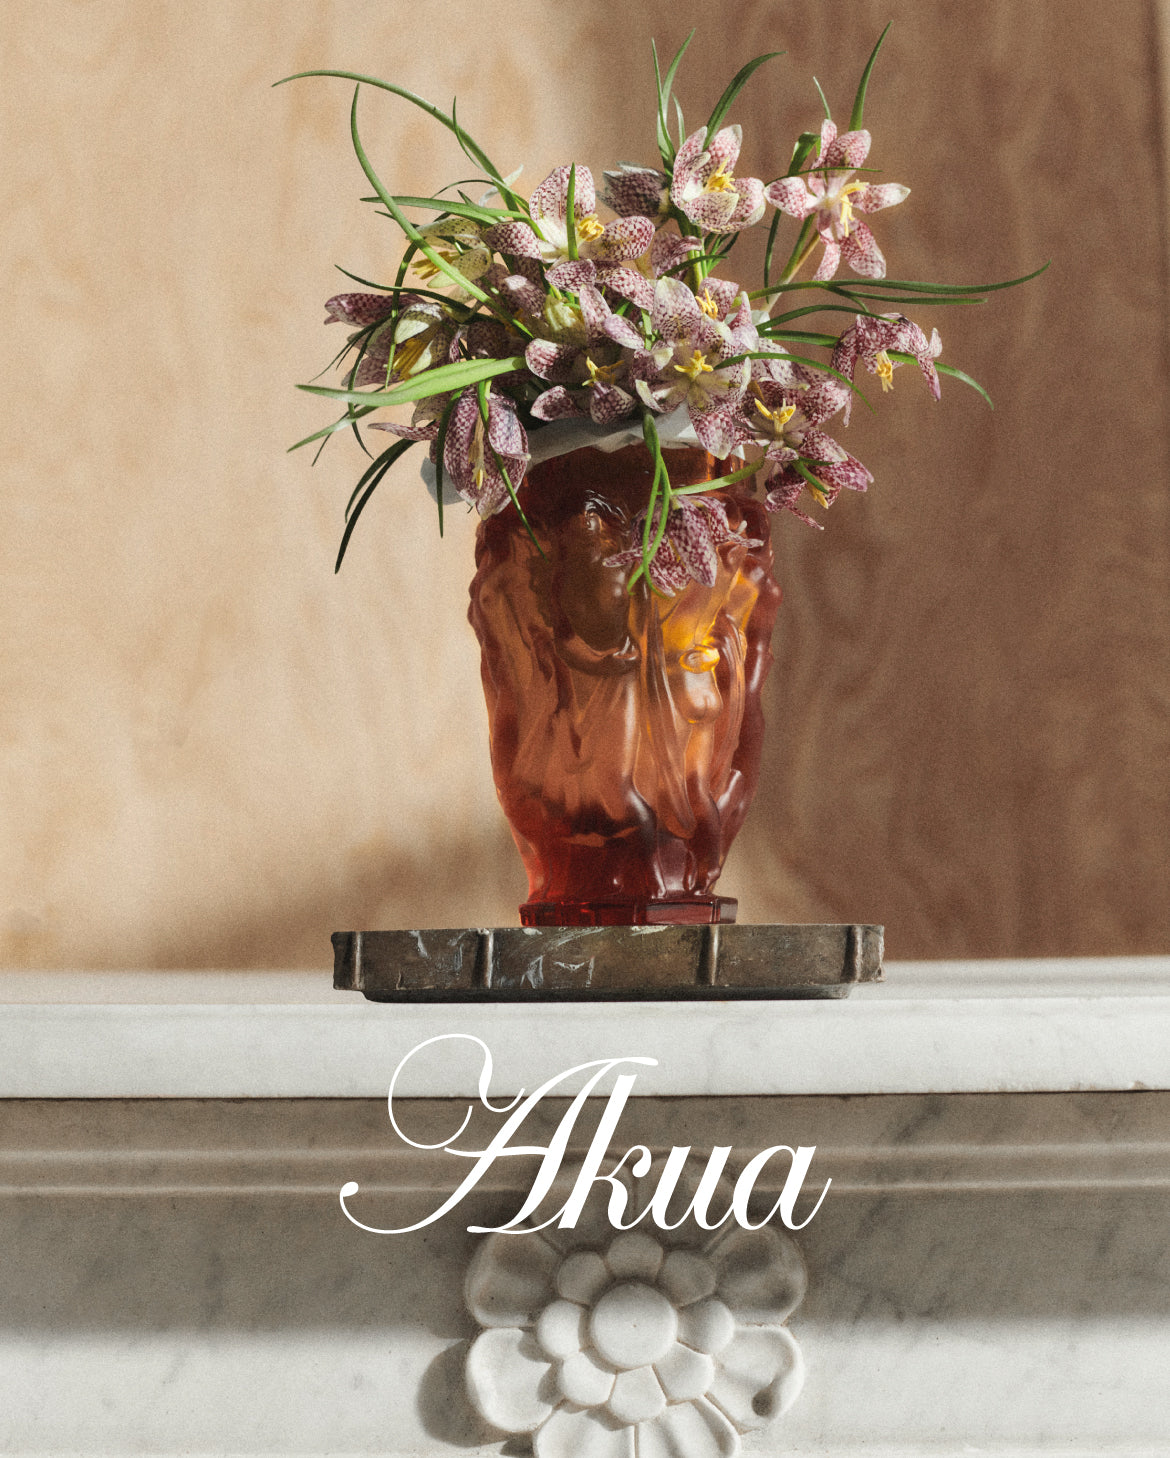 Akua Objects Glassware. Mouth blown and handmade Bohemian Glassware. Made in Bohemia. The Michael Vase. The historical country of central Europe, Bohemia, became famous for its decorative glassware during the Renaissance, and hereafter earned international reputation for its high baroque style. Today, Bohemian glass are desired collection pieces to many antique collectors. The Michael collection embraces women as a source of inspiration.